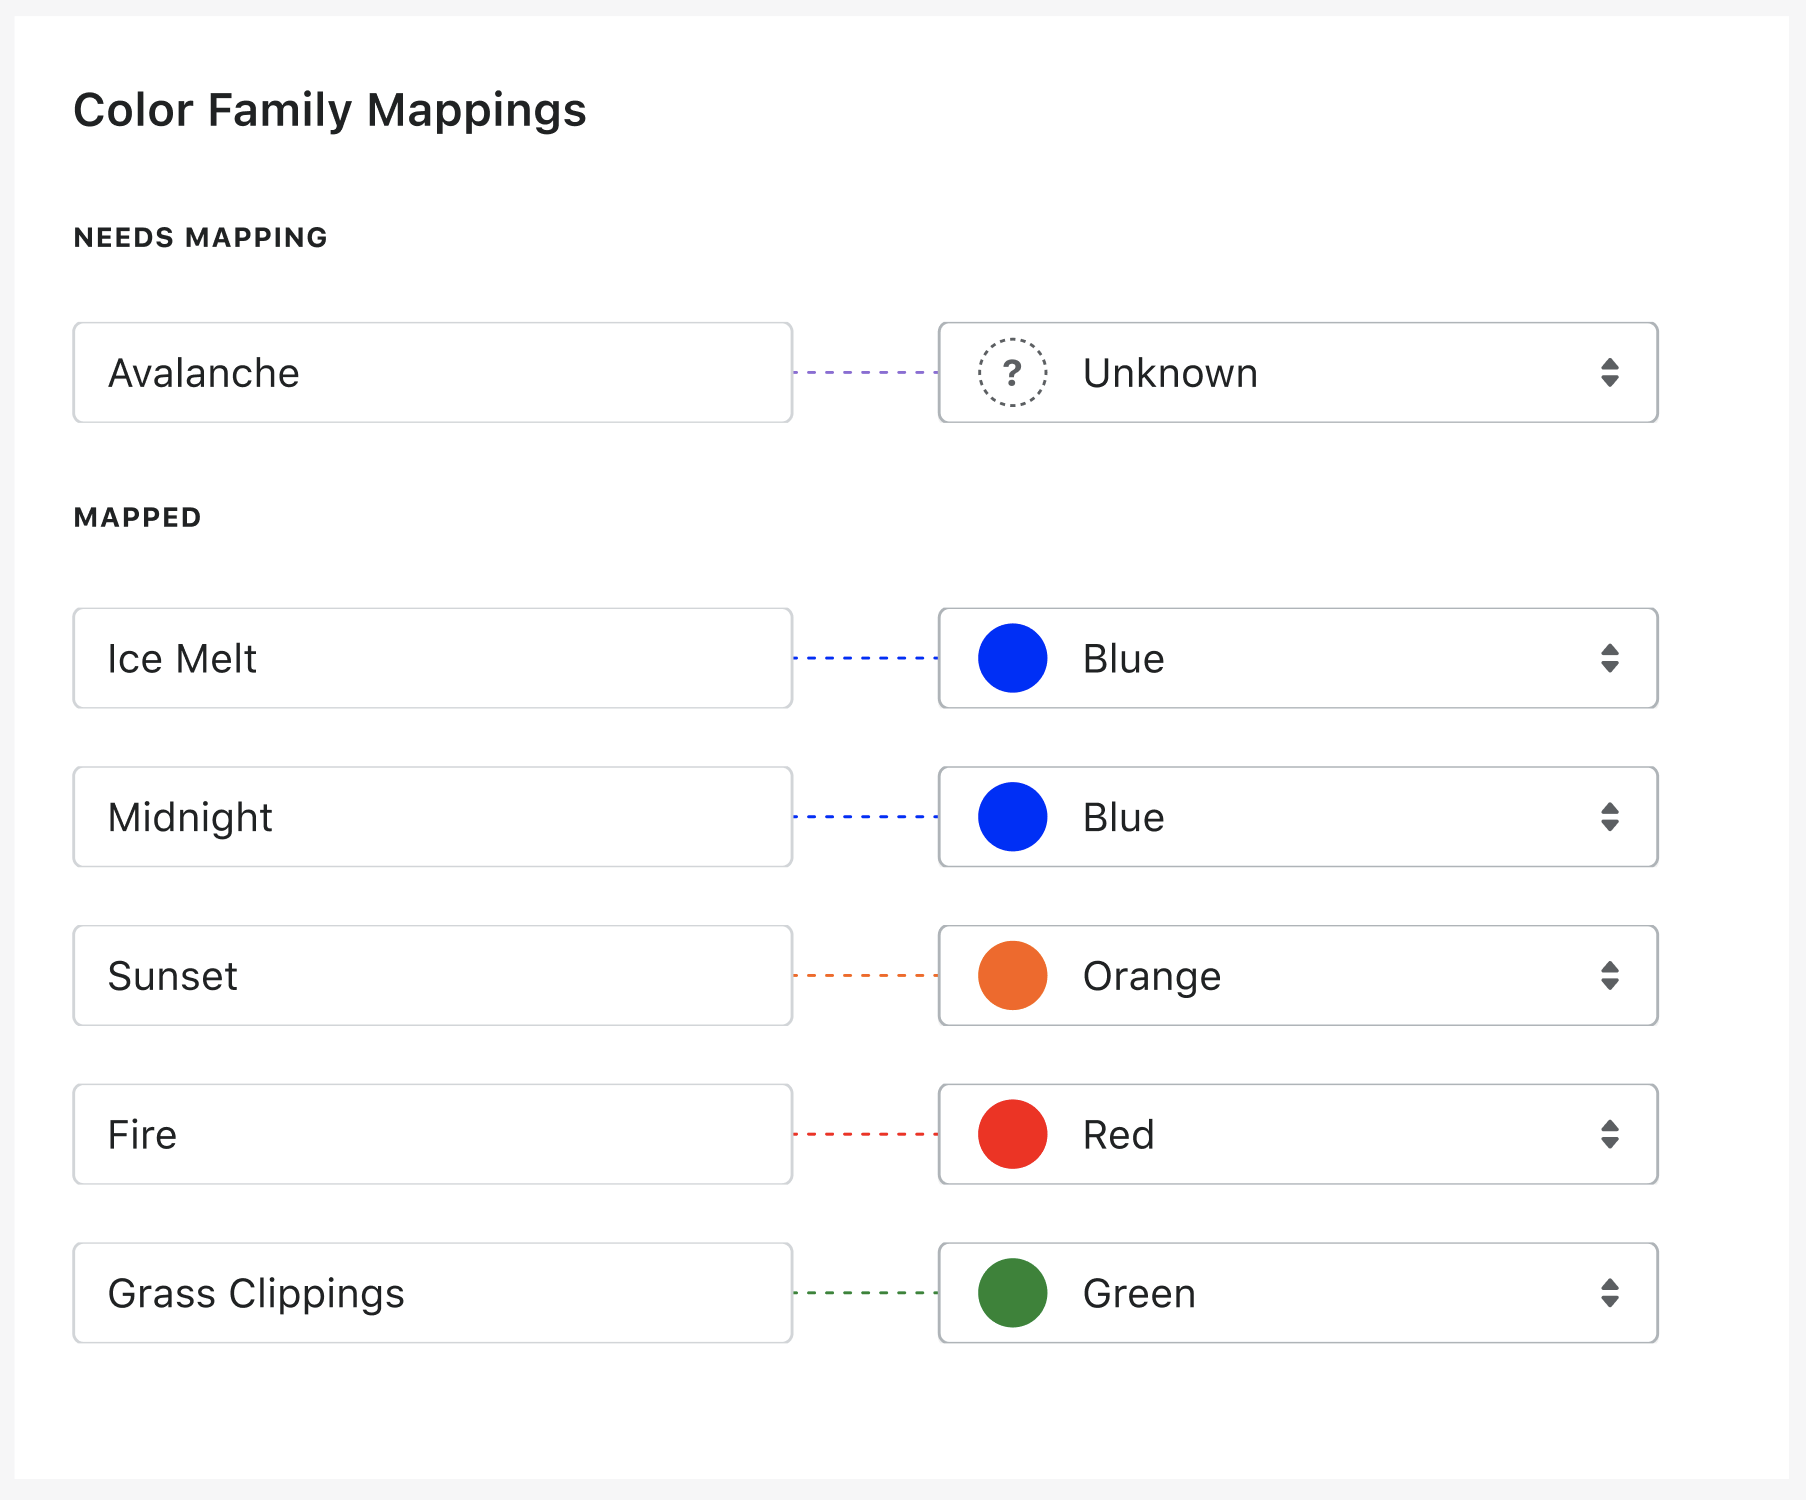 Retail Connect automatically maps colors to color families.